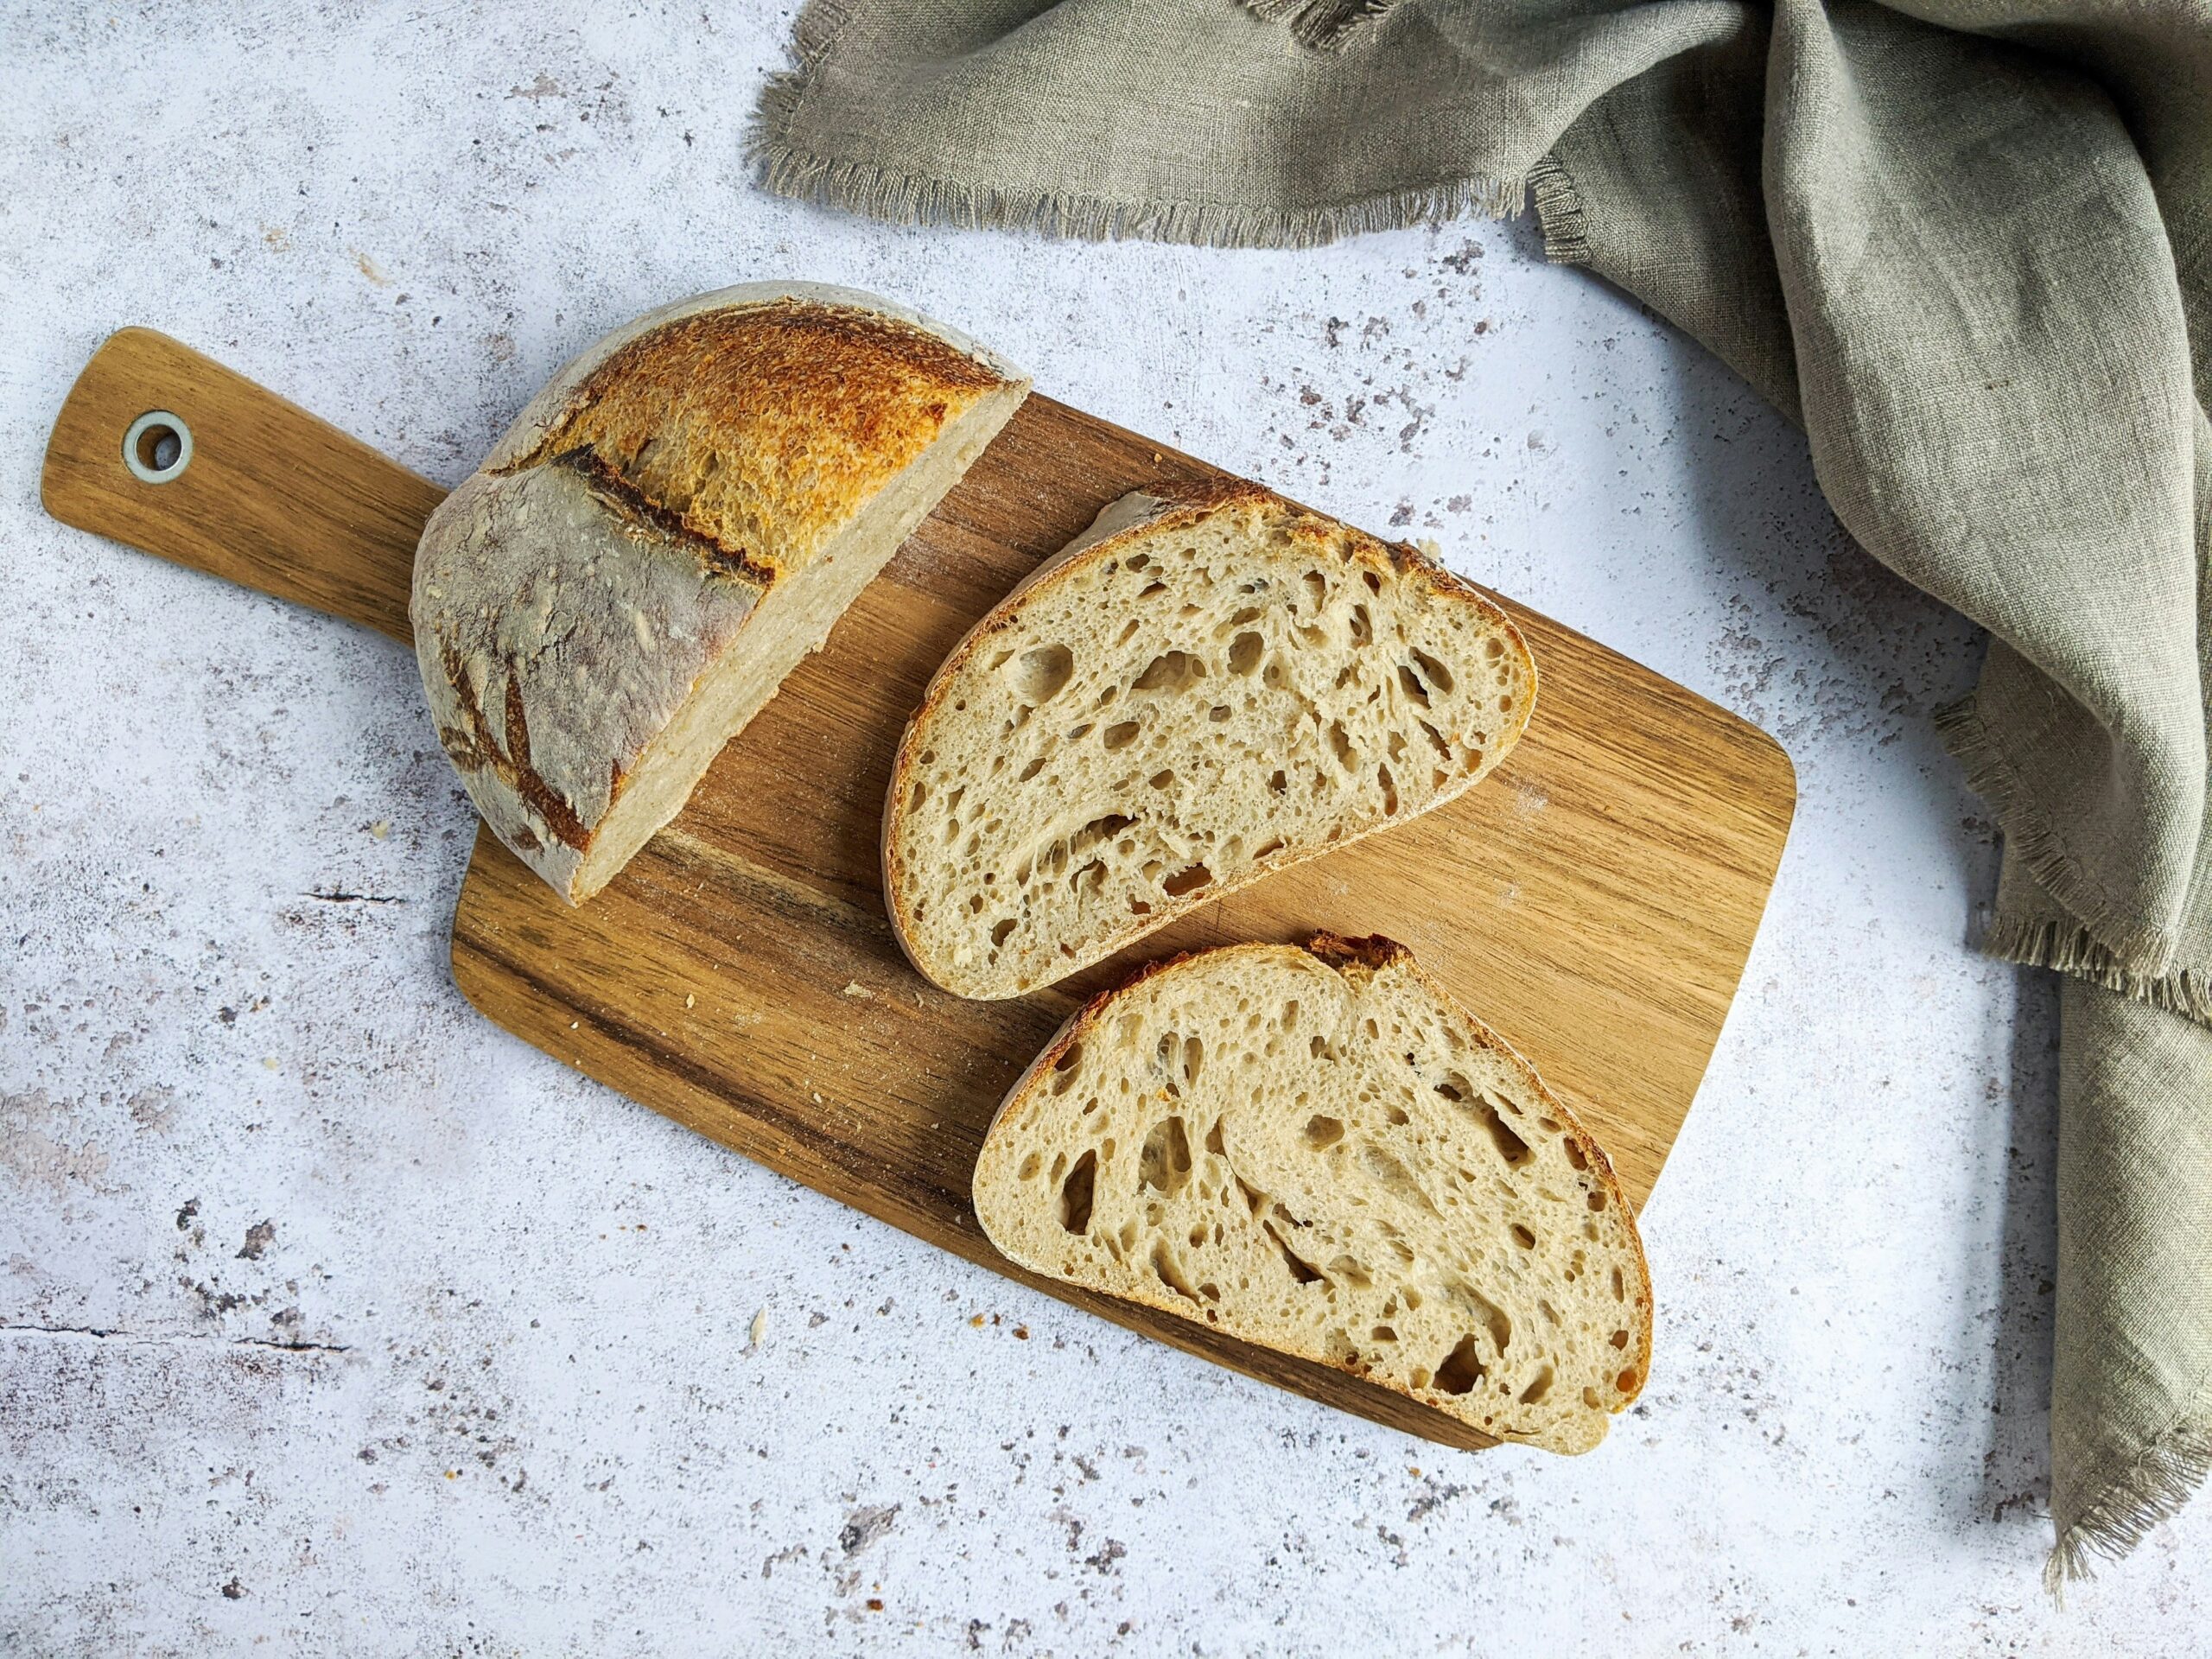 Wood is one of the best materials for a cutting board. Here are some of the best types of wood that work well in a cutting board. Pictured: A cutting board with sourdough bread